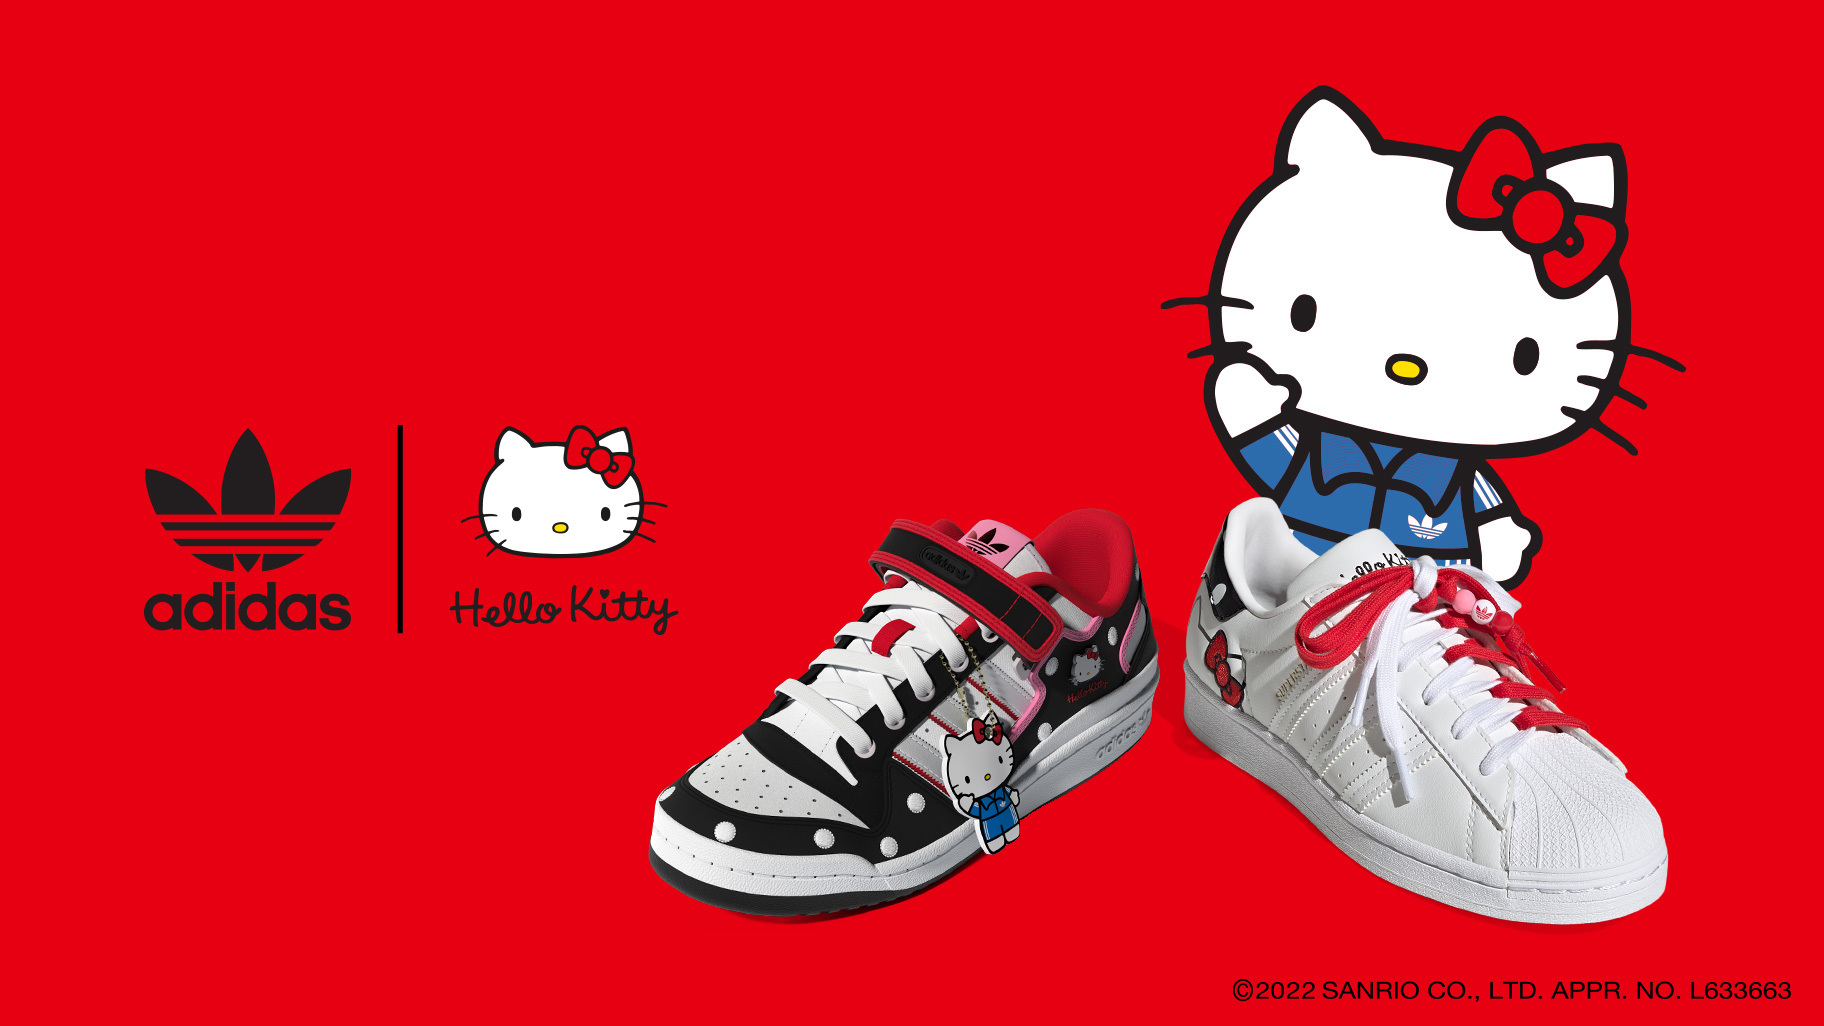 Adidas releases an adorable Hello Kitty collection of sneakers and  accessories